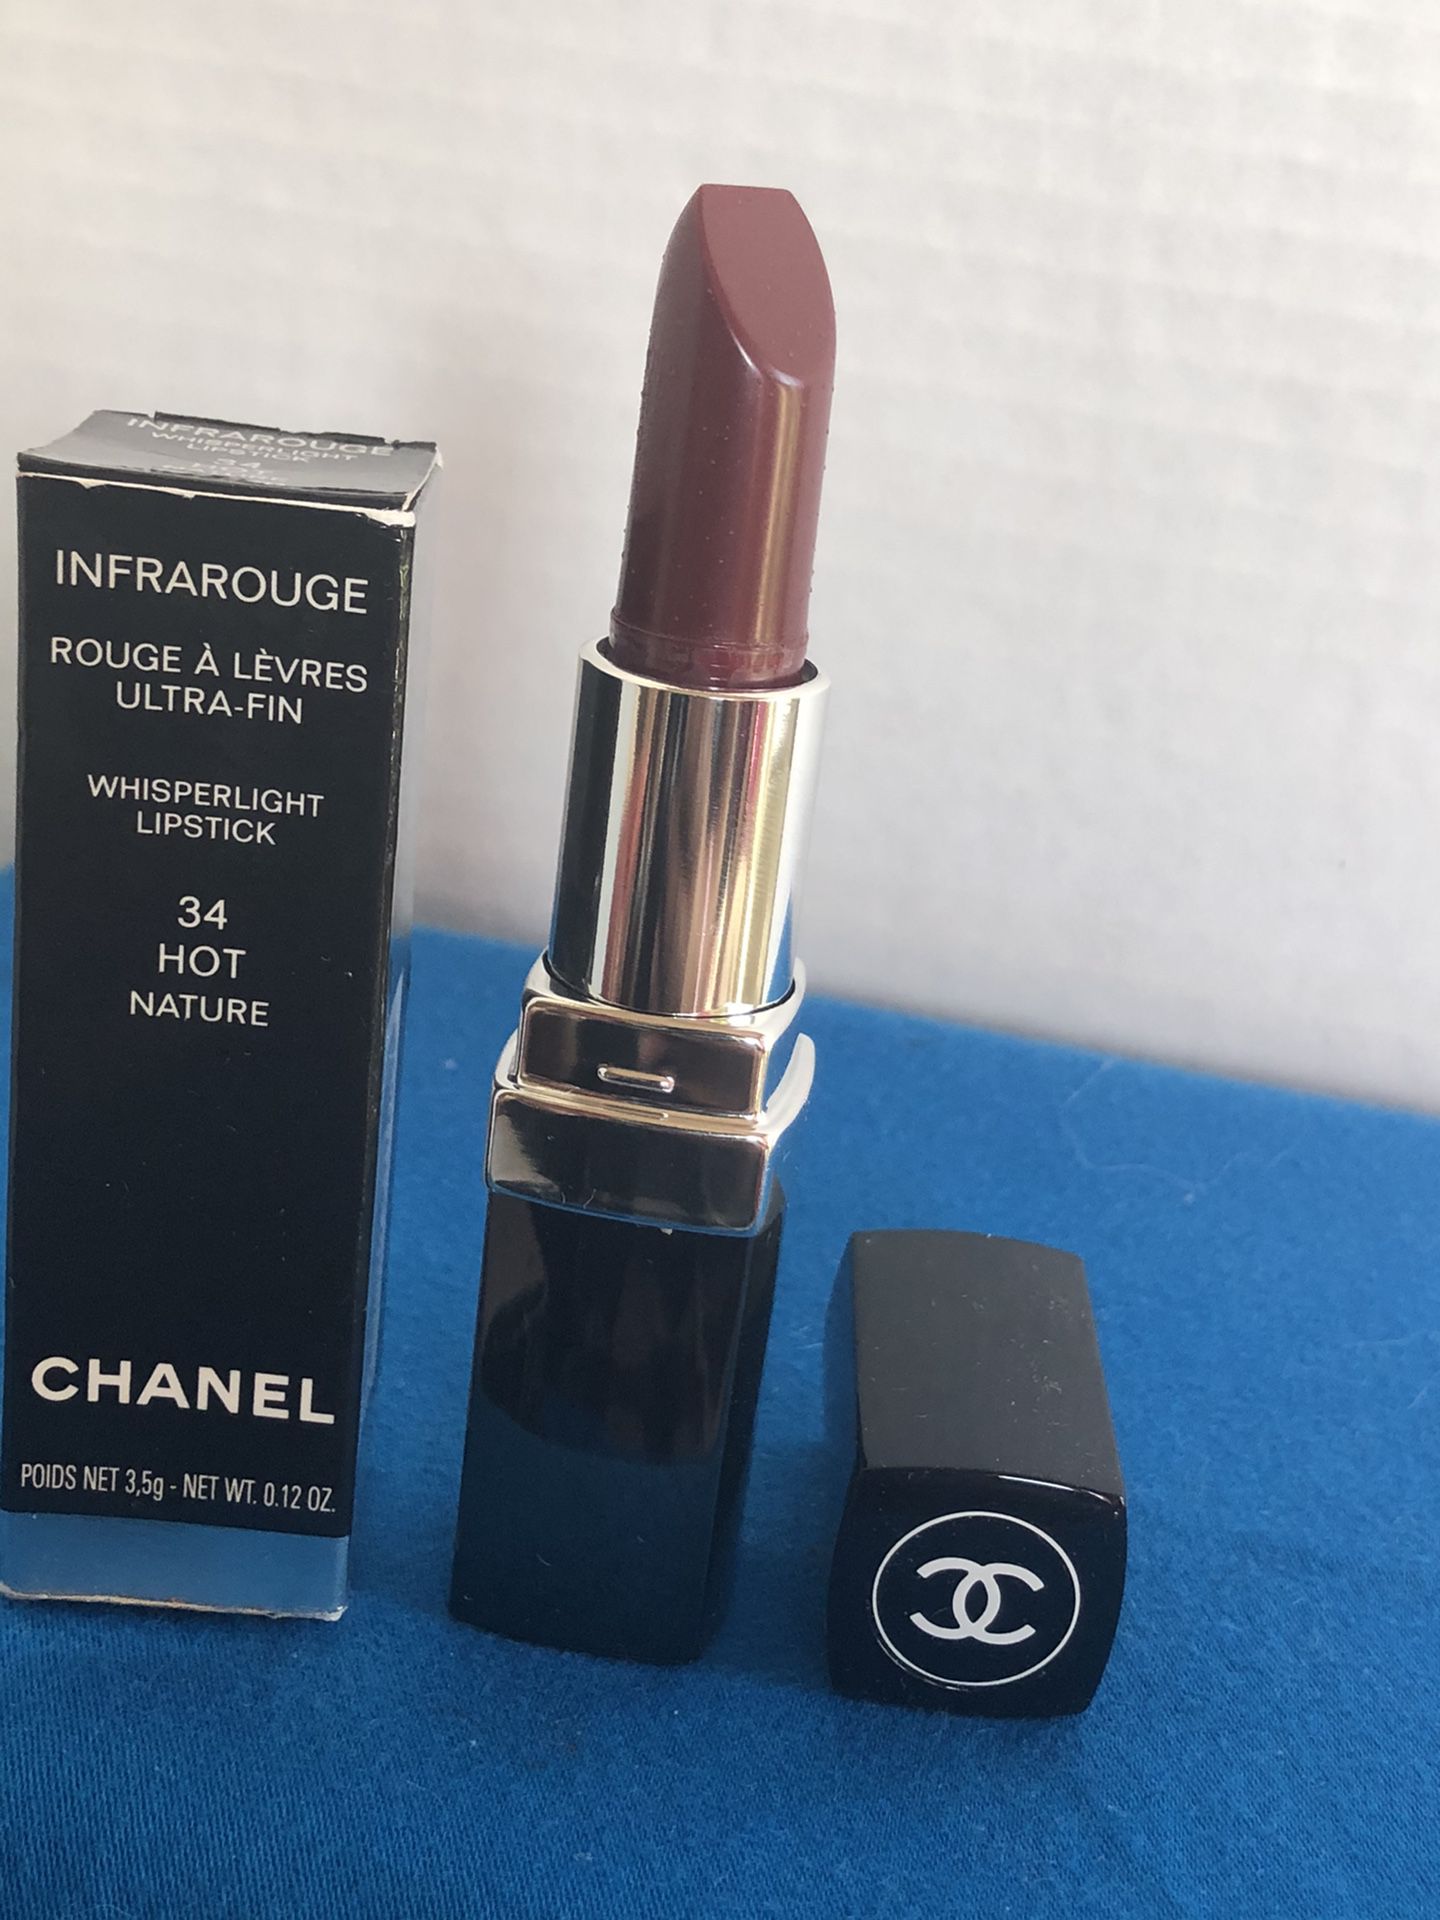 Chanel lipstick #34 Hot Nature, I have 4 available.